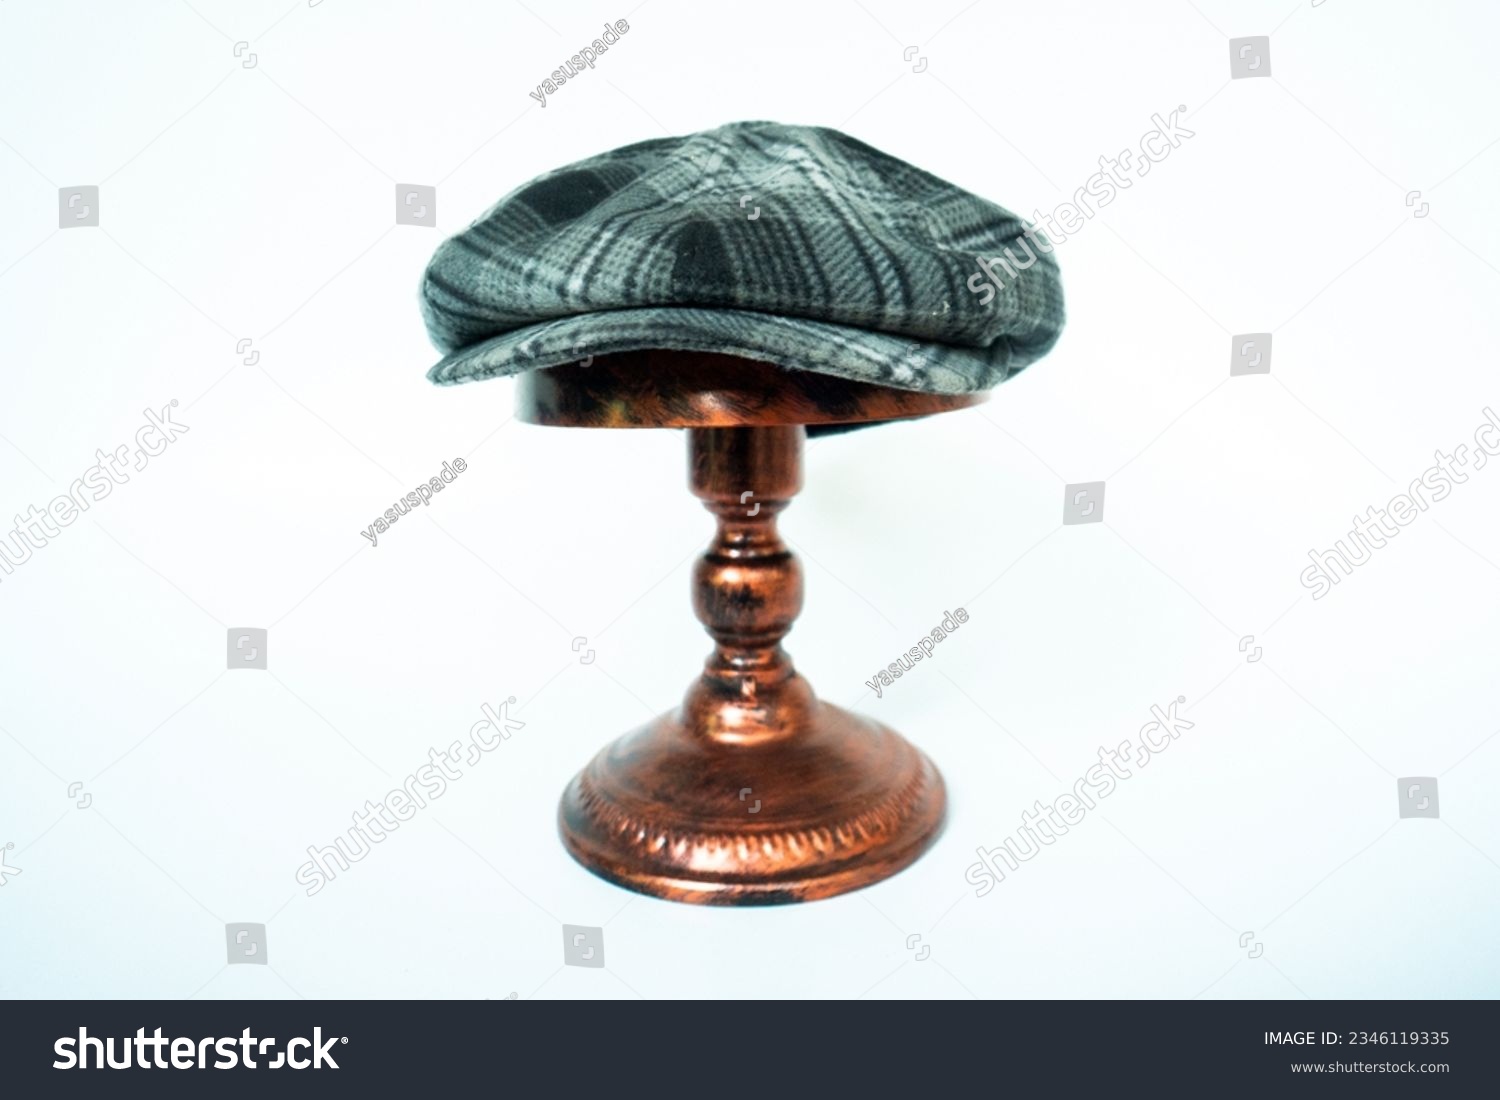 Studio photo concept for classic eight-panel newsboy cap with wool material. newsboy hat in black and white with a tartan pattern mounted on a bronze mannequin head on a white background. #2346119335